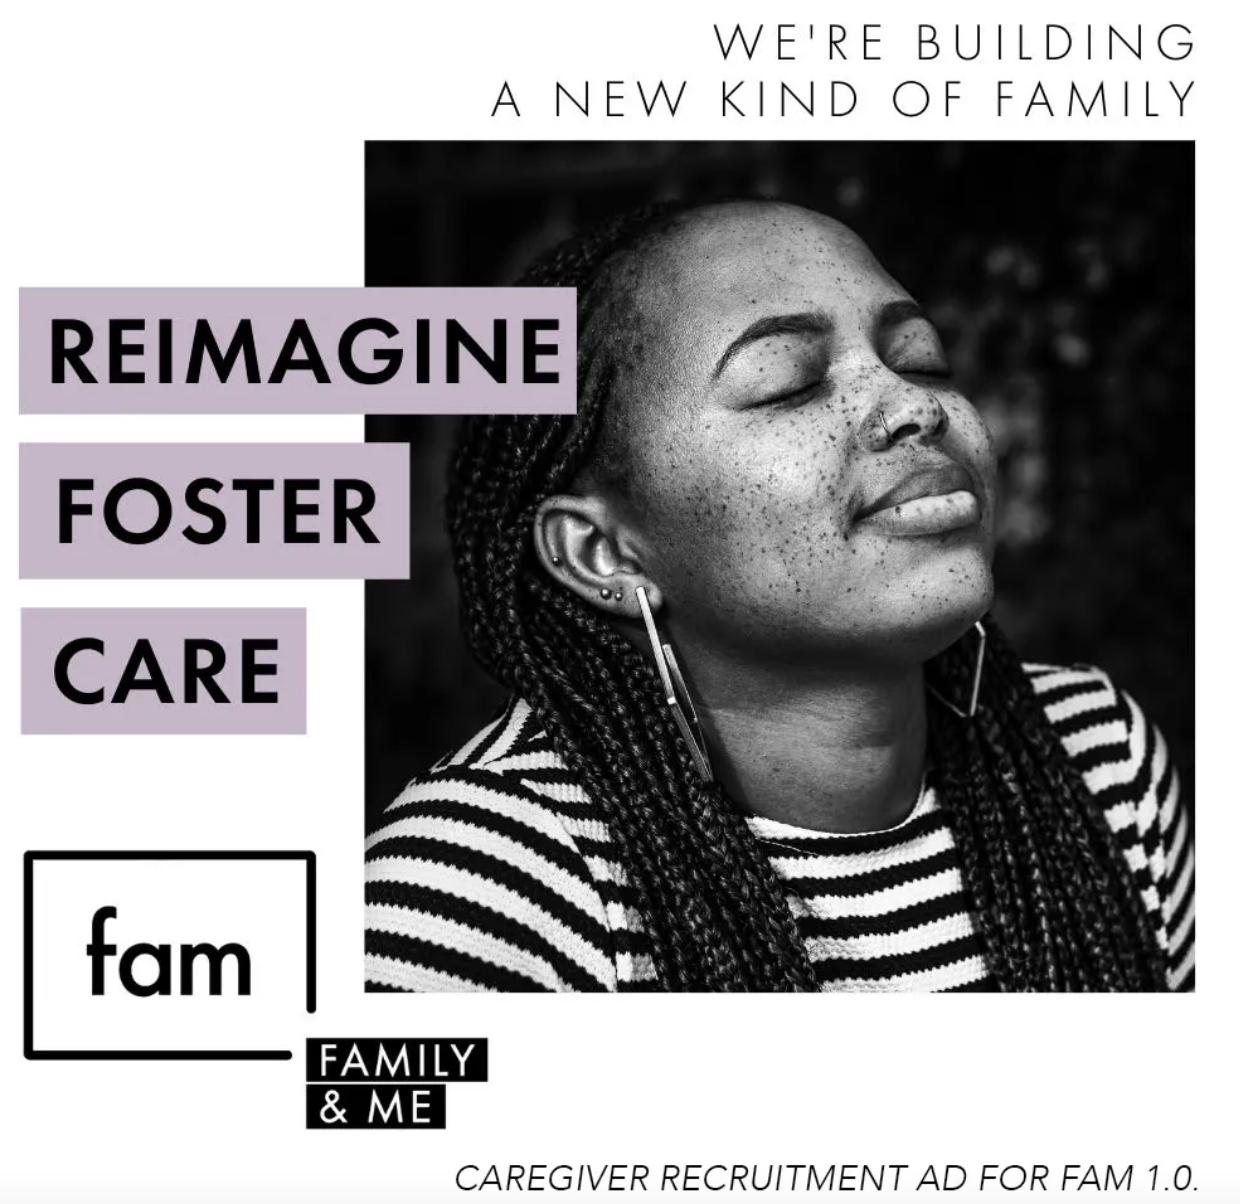 FAM Caregiver recruitment ad. Image by Freedom Forward.